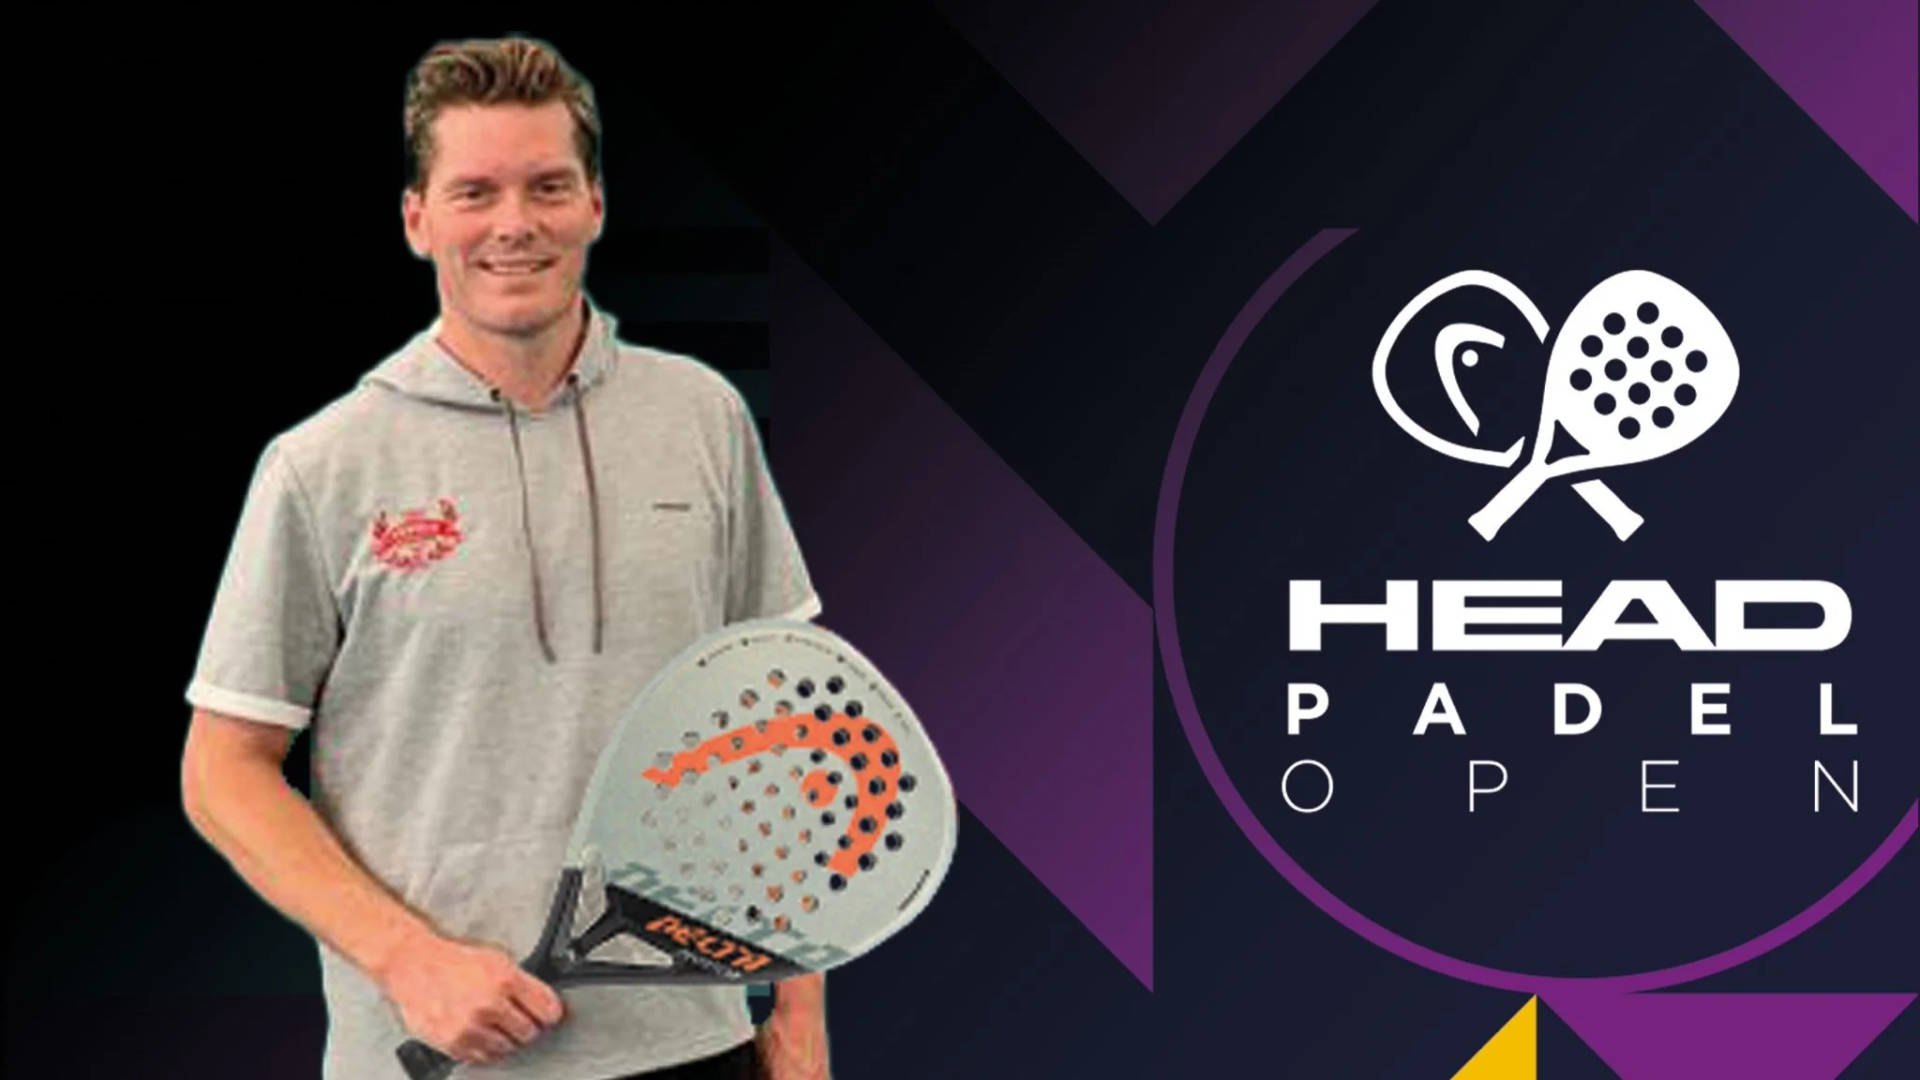 Thomas Enqvist in action during the Head Padel Open Wallpaper